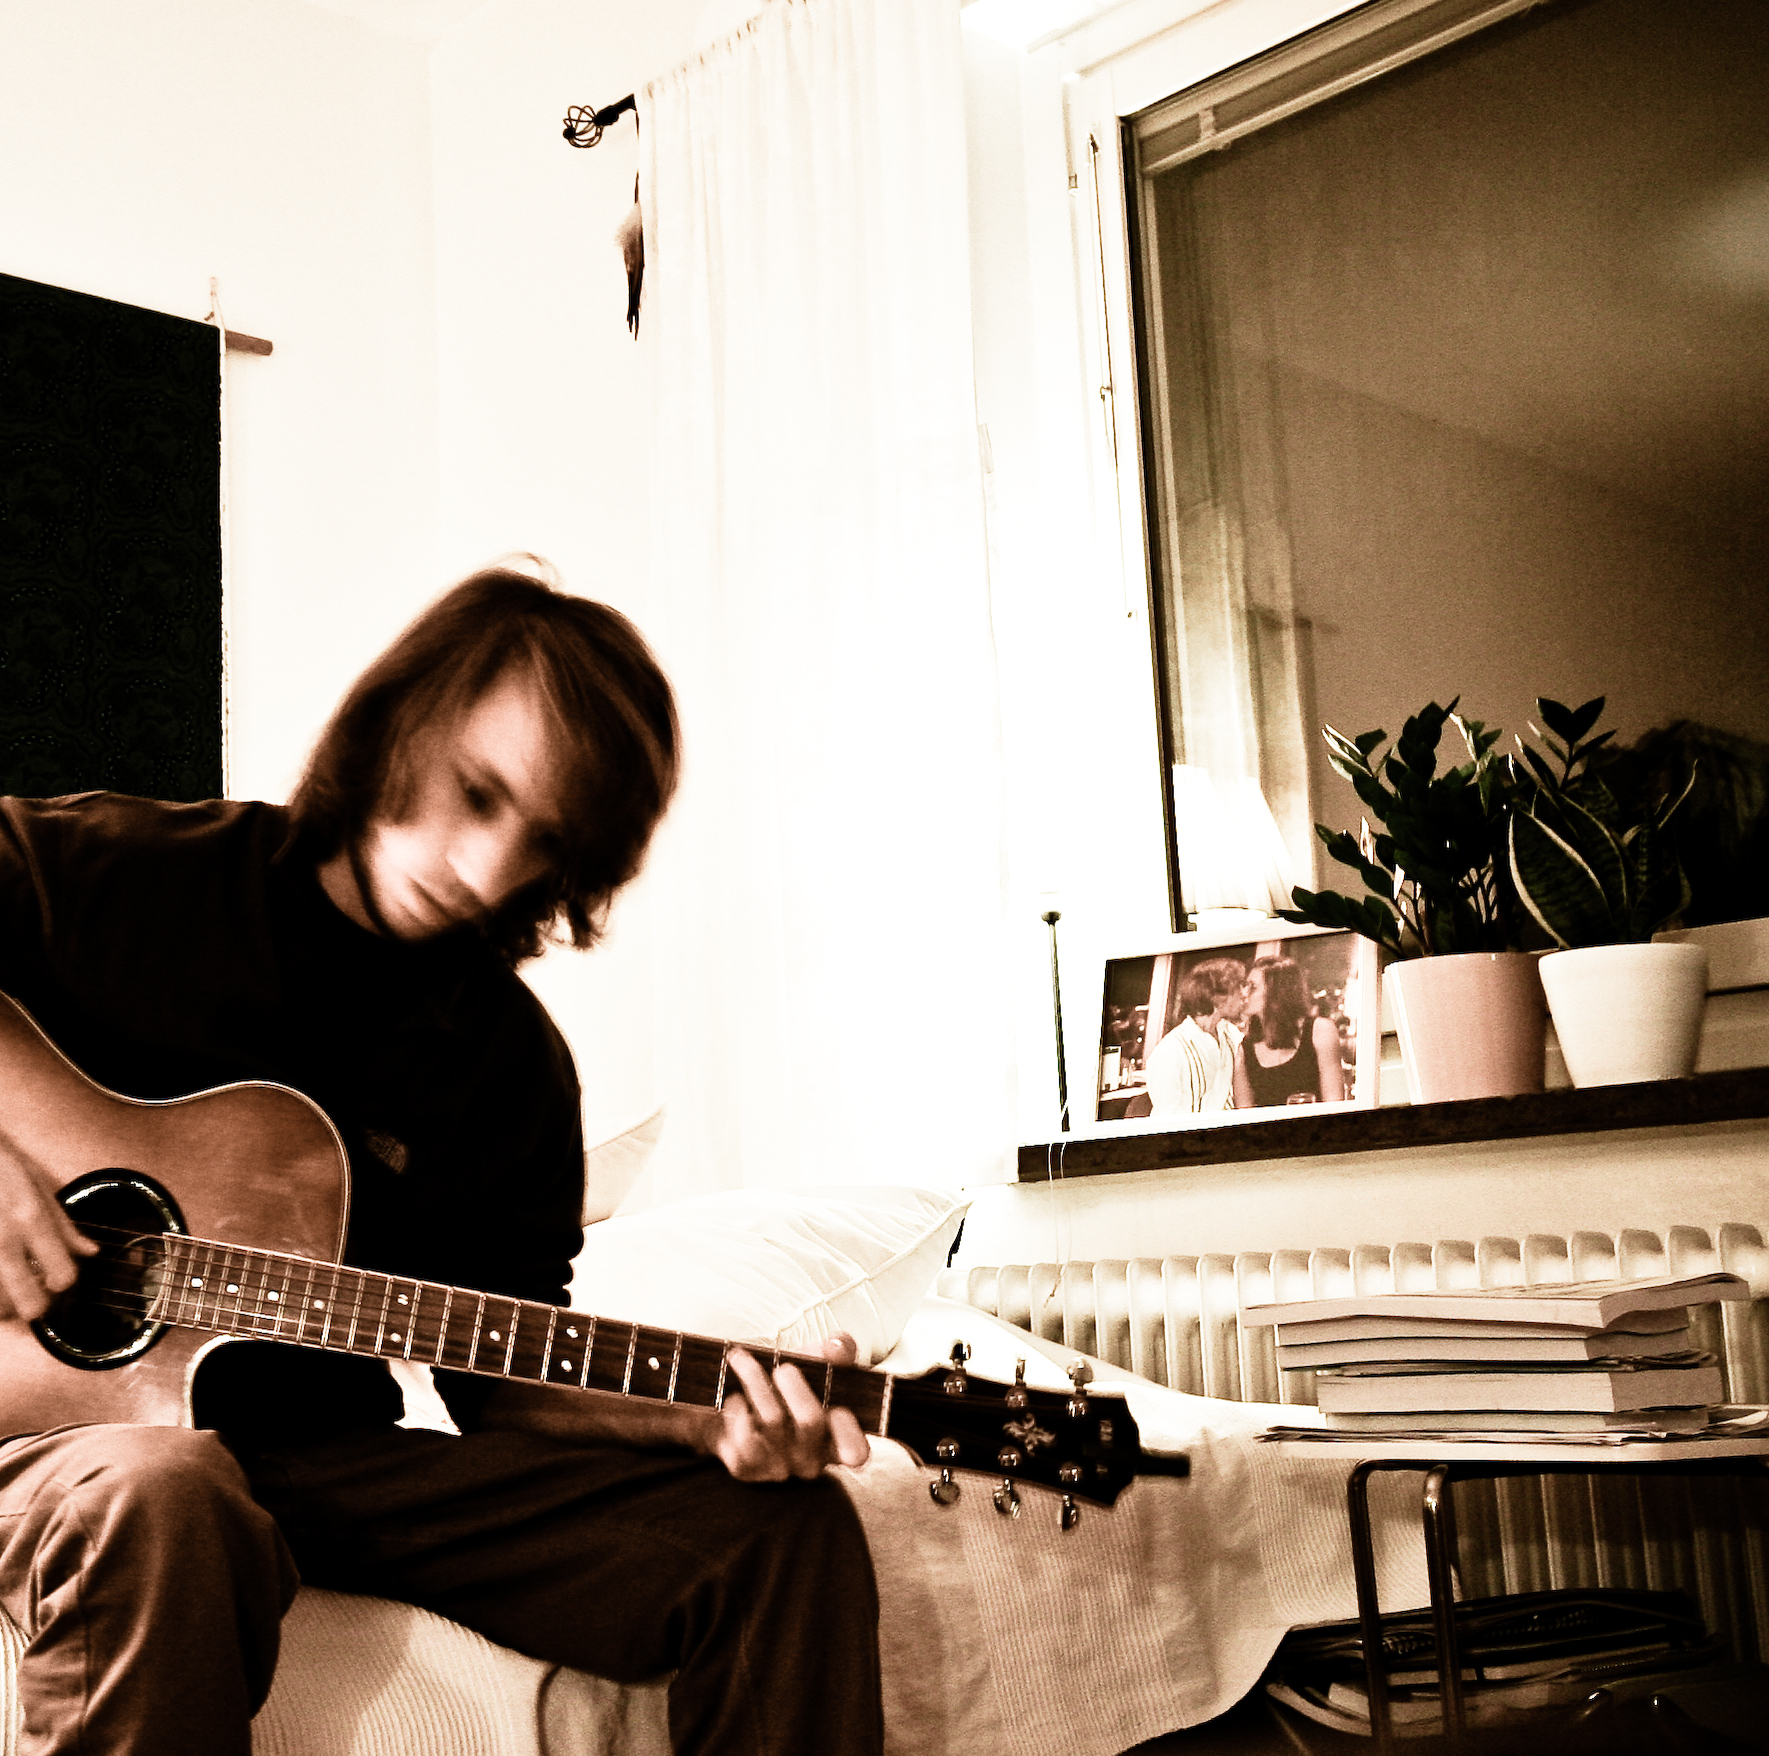 a man sitting on a couch holding a guitar